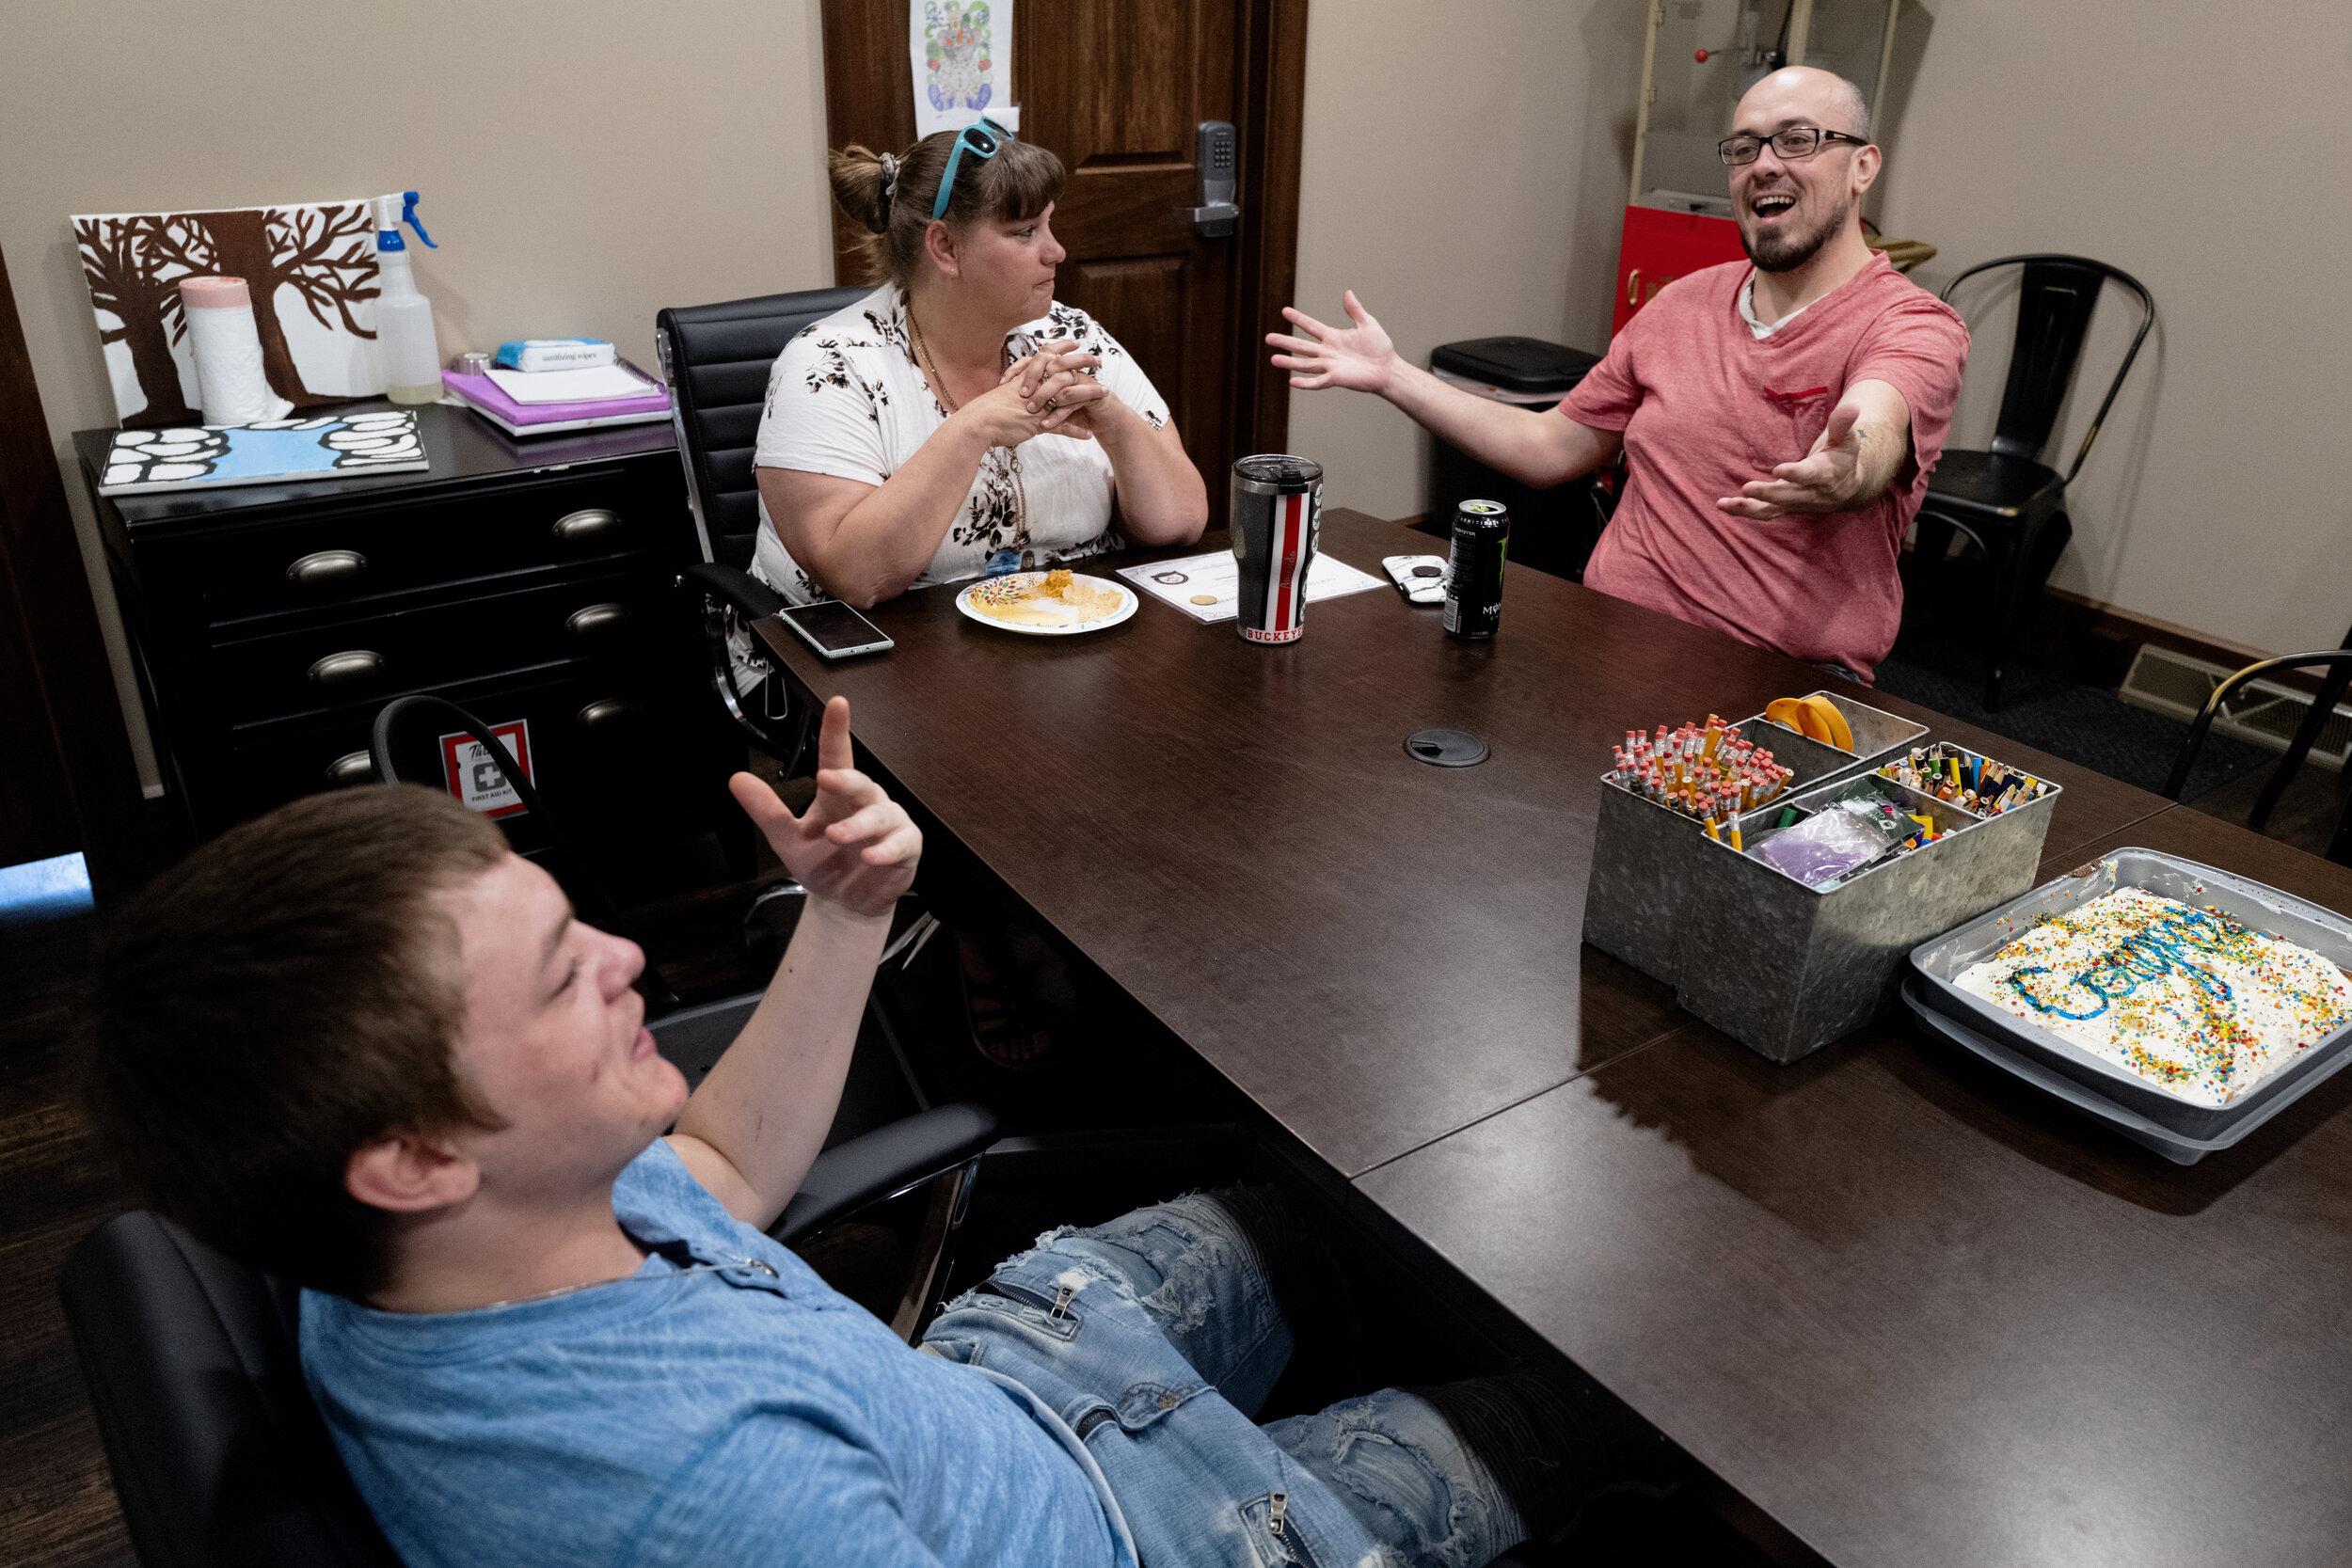  Reuben celebrates his graduation from IOP (intensive outpatient treatment), a rehabilitation that counsels him on his trauma and past drug usage, with Ben and his counselor Amanda Jennings in New Lexington, Ohio, on May 25, 2021. “I’m so proud of hi